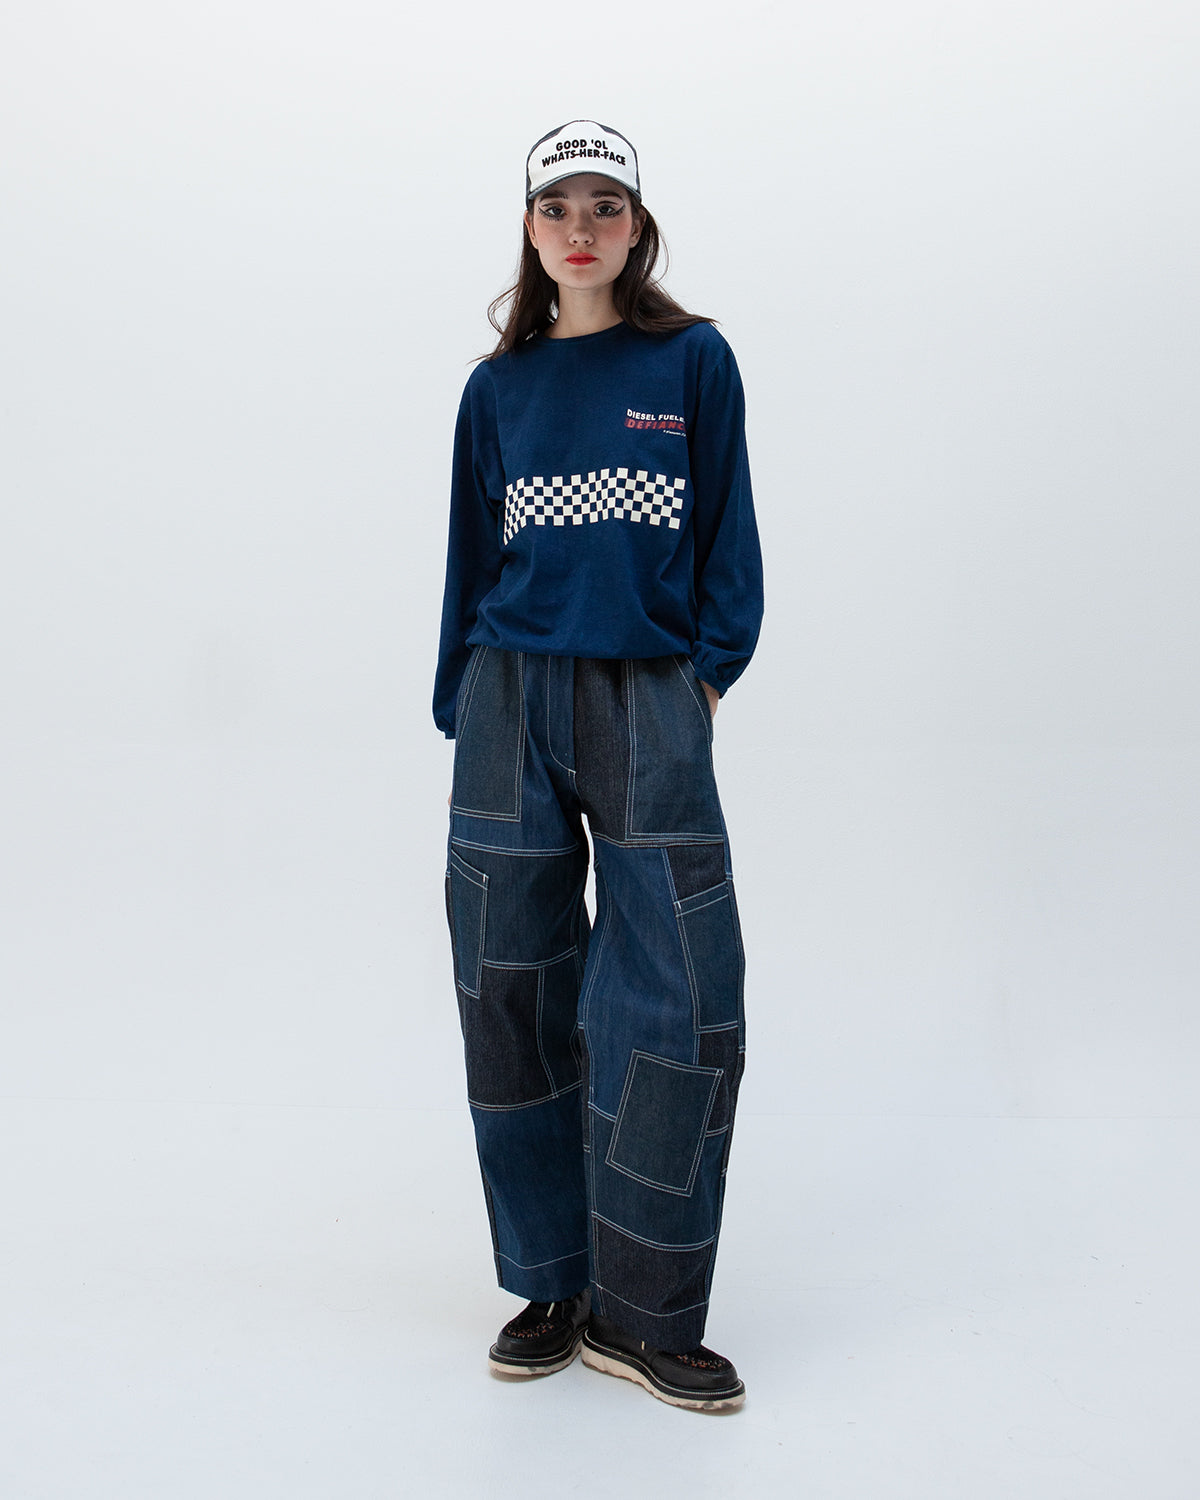 GOOD 'OL WHATS-HER-FACE - Unisex Freedom Flight Pants - Indigo - Space Camp